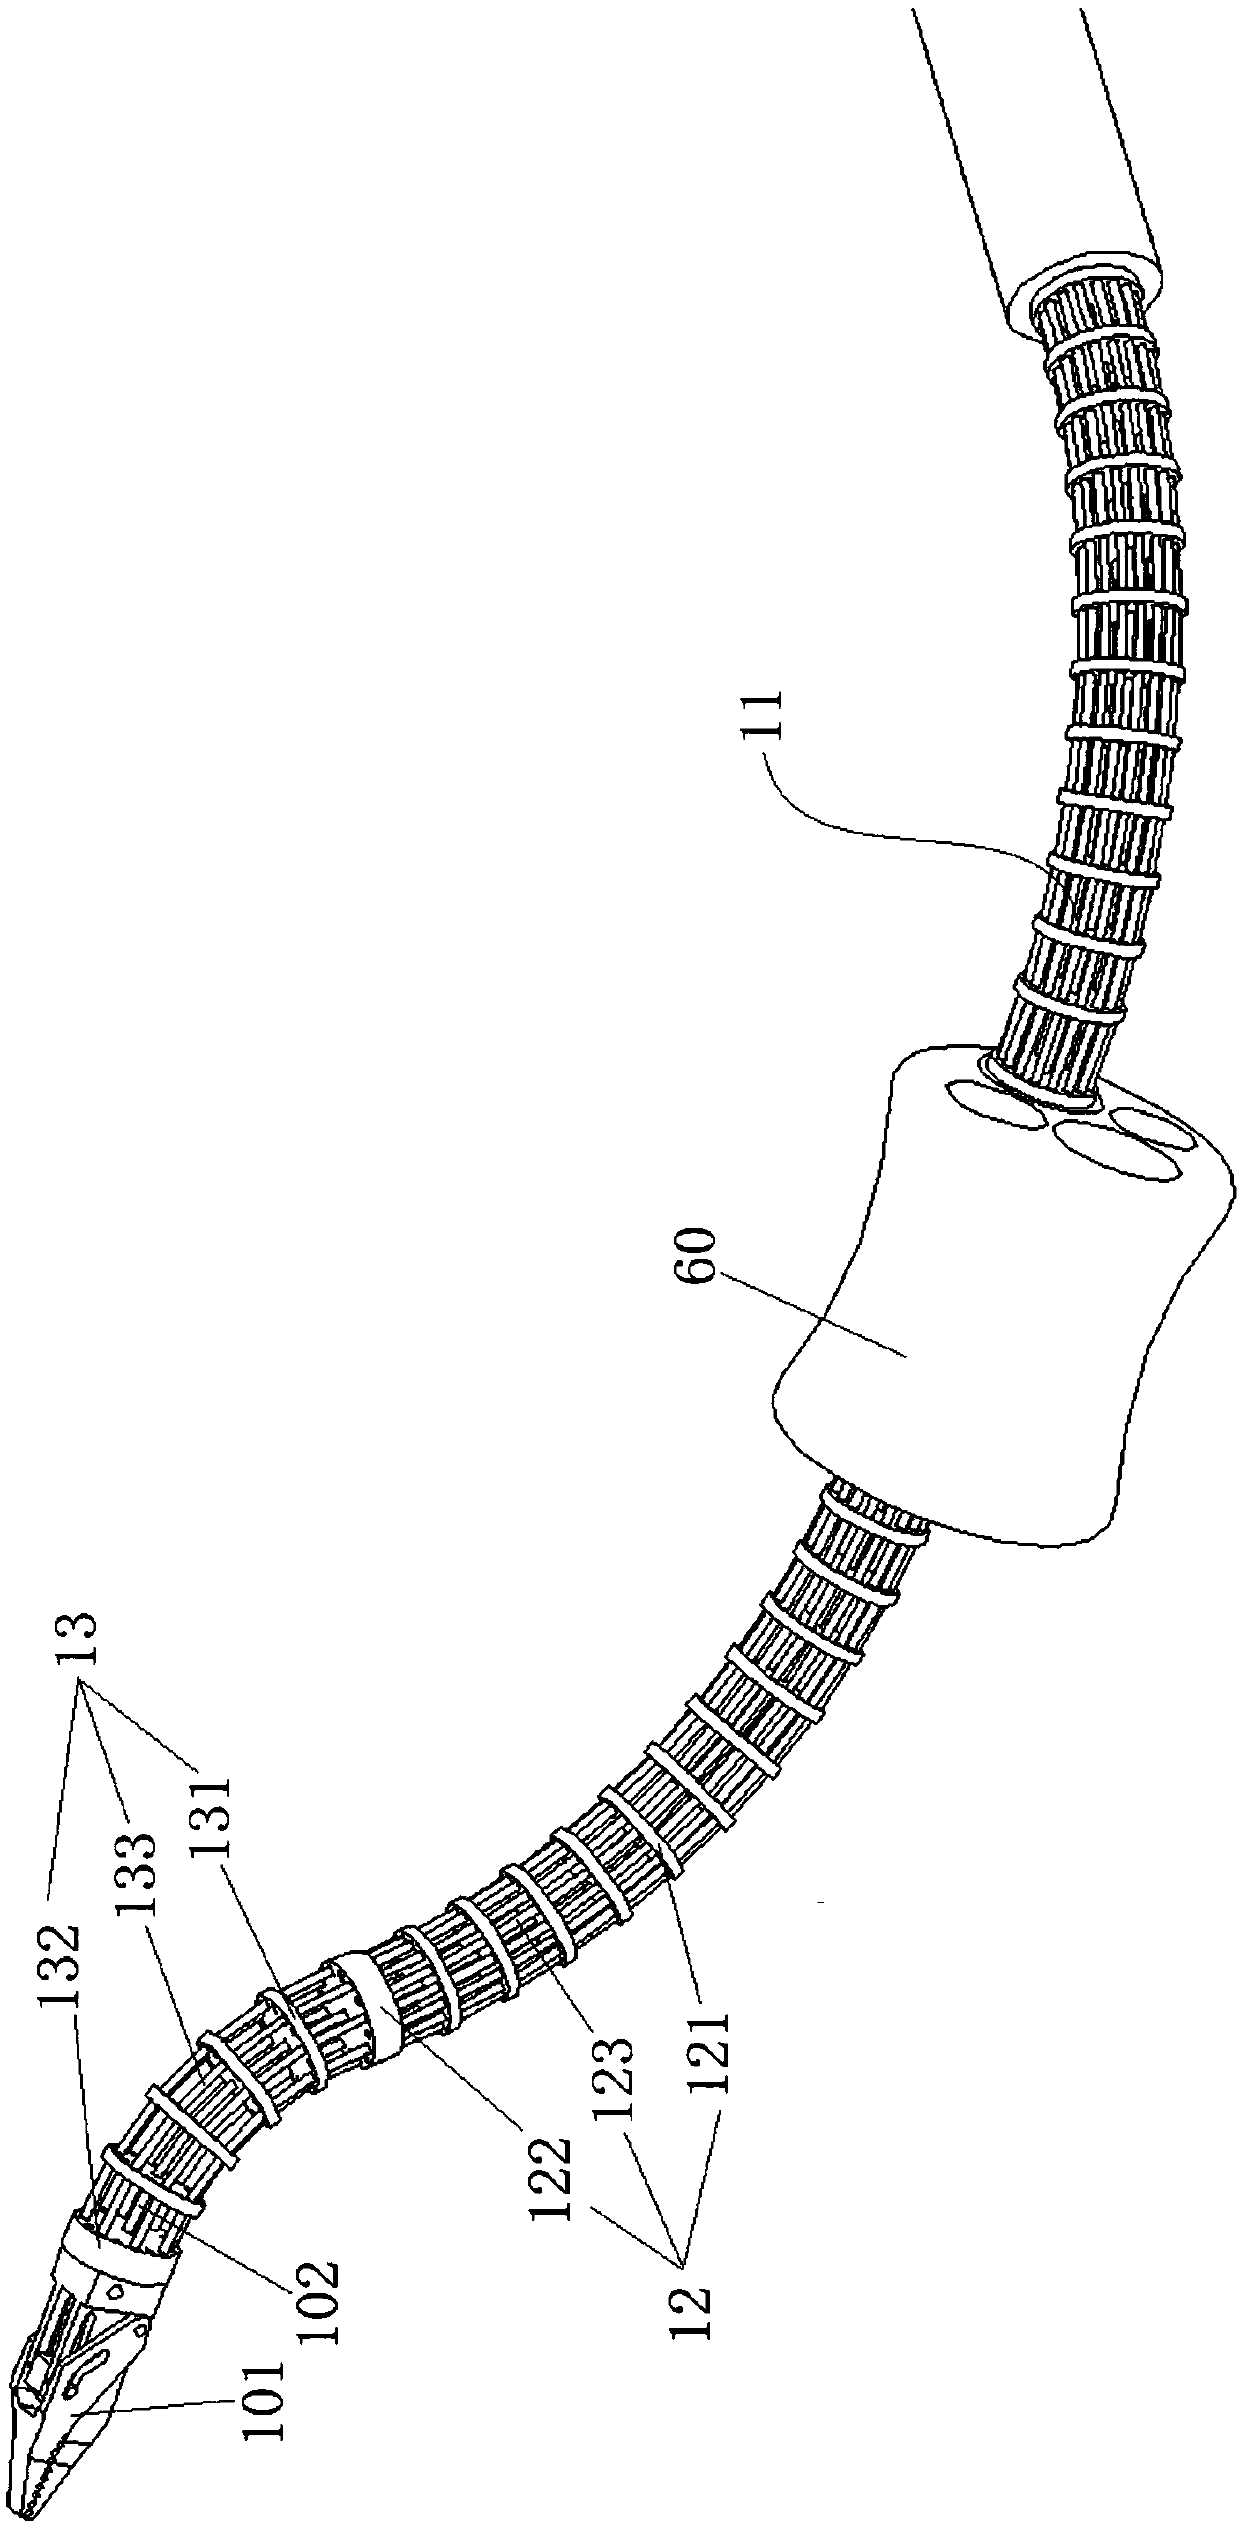 A flexible surgical tool system using constrained structural bone